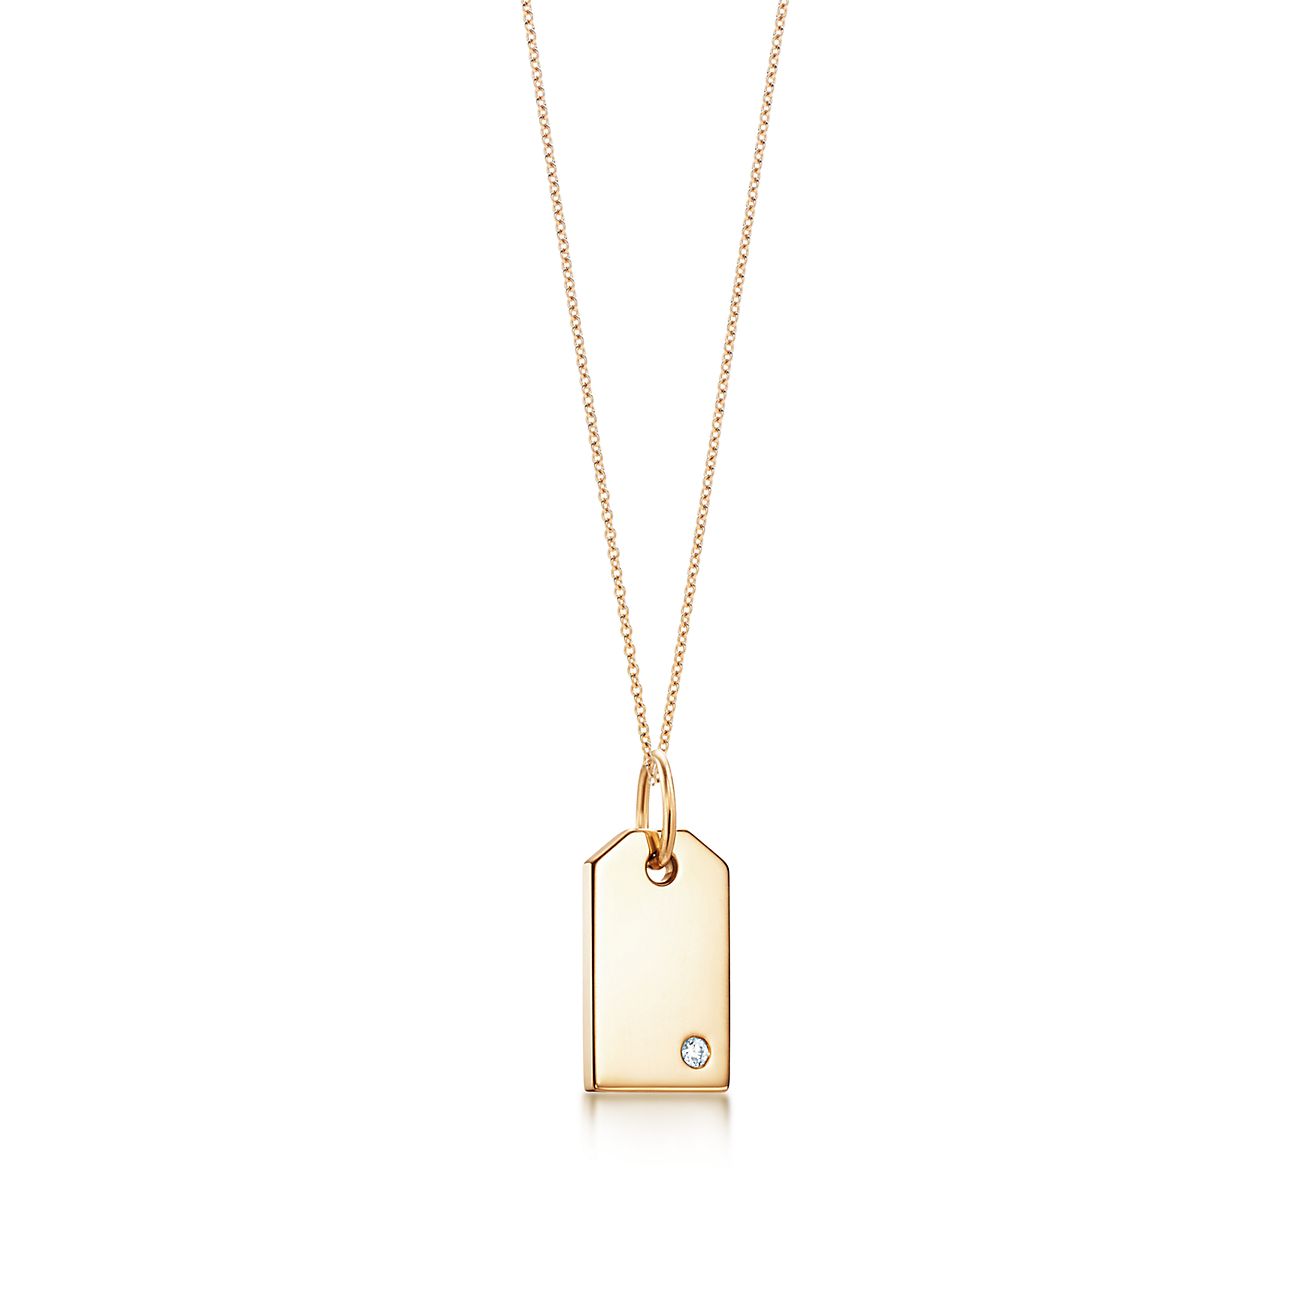 tiffany tag necklace gold